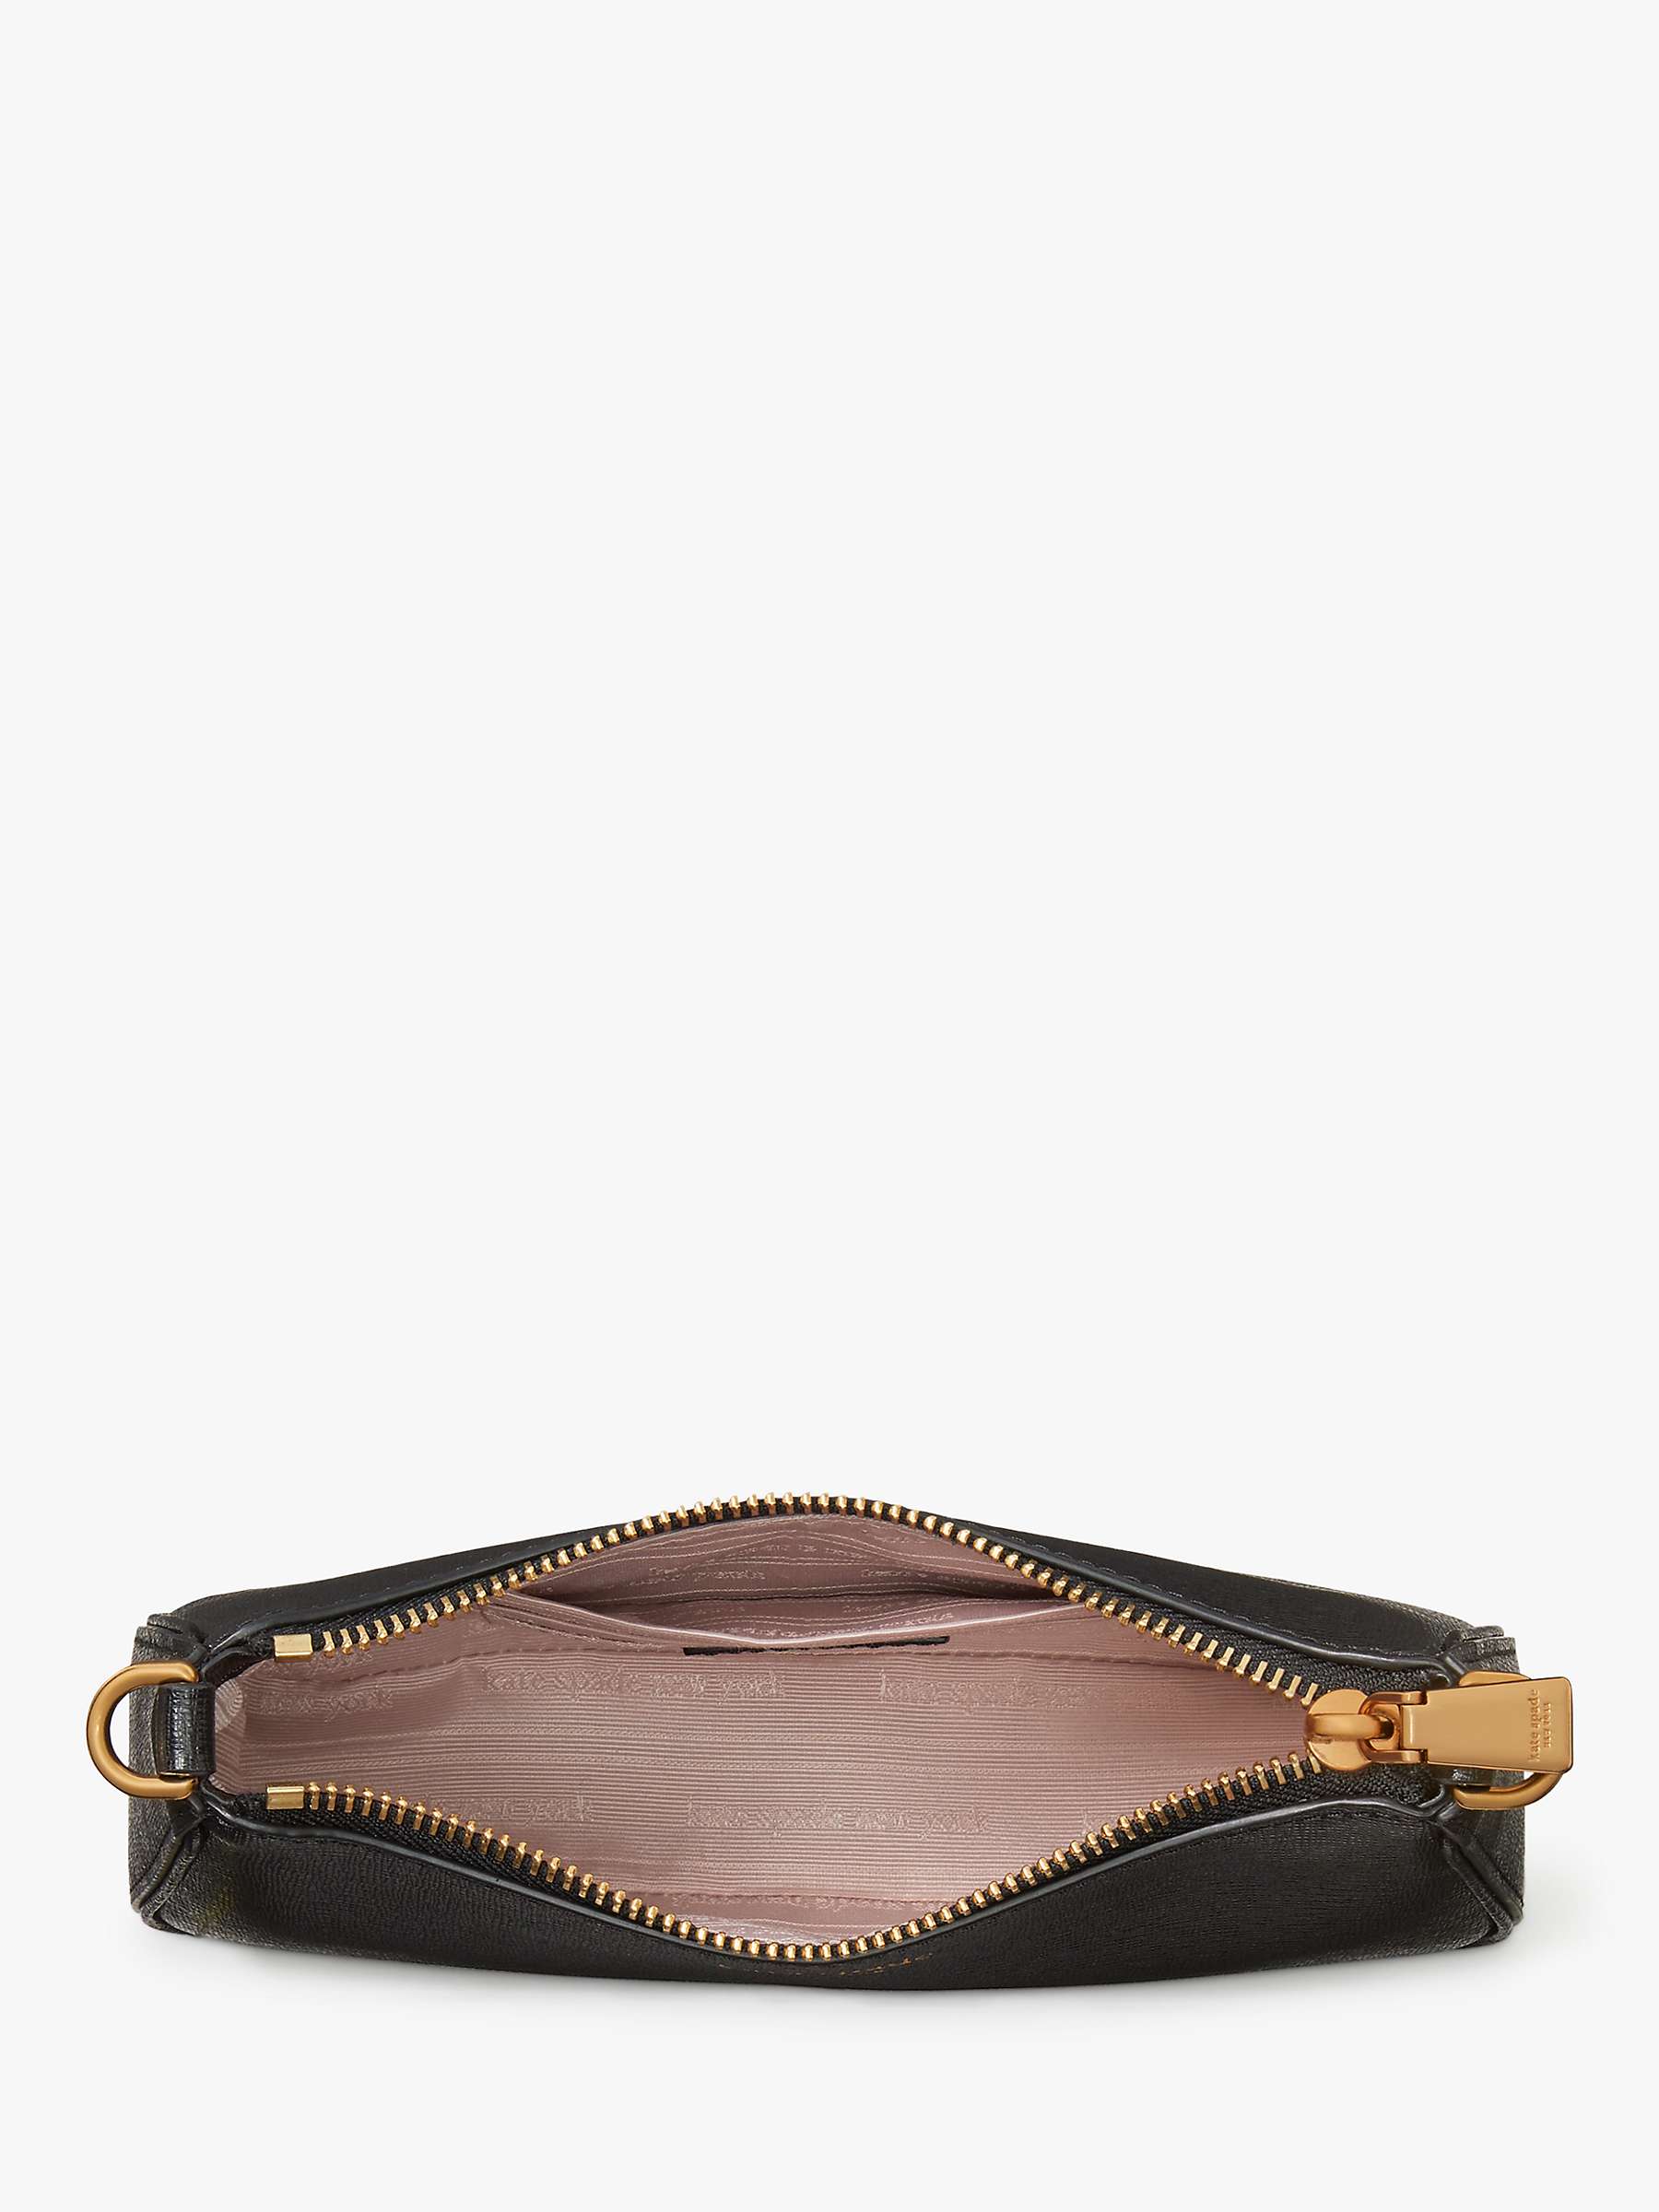 Buy kate spade new york Morgan Leather Double Up Crossbody Bag Online at johnlewis.com